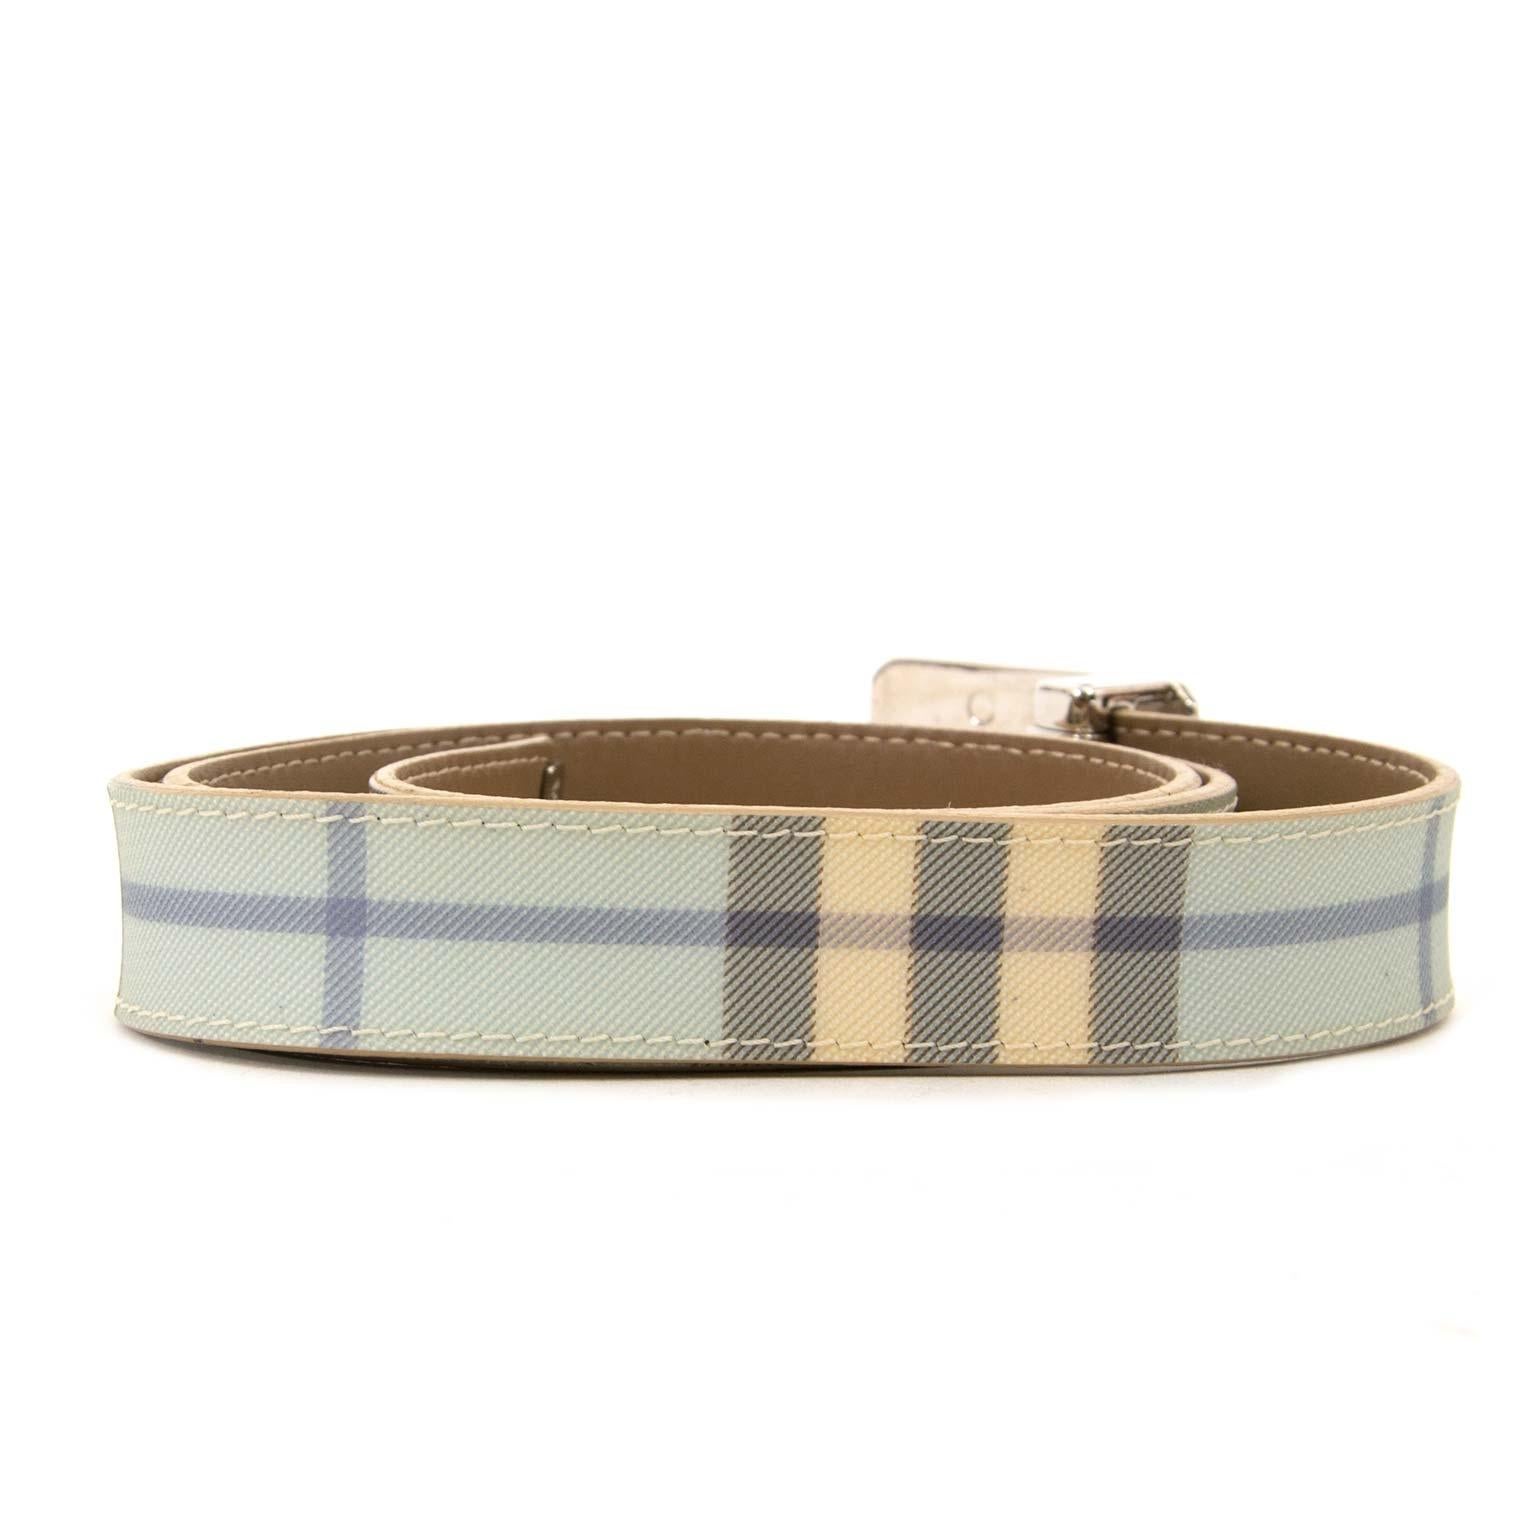 Good preloved condition

Burberry Light Blue Belt - Size 90

This belt by Burberry features its iconic checked pattern and a silver buckle. 
Wear this belt to give an elegant look to your daily outfit.